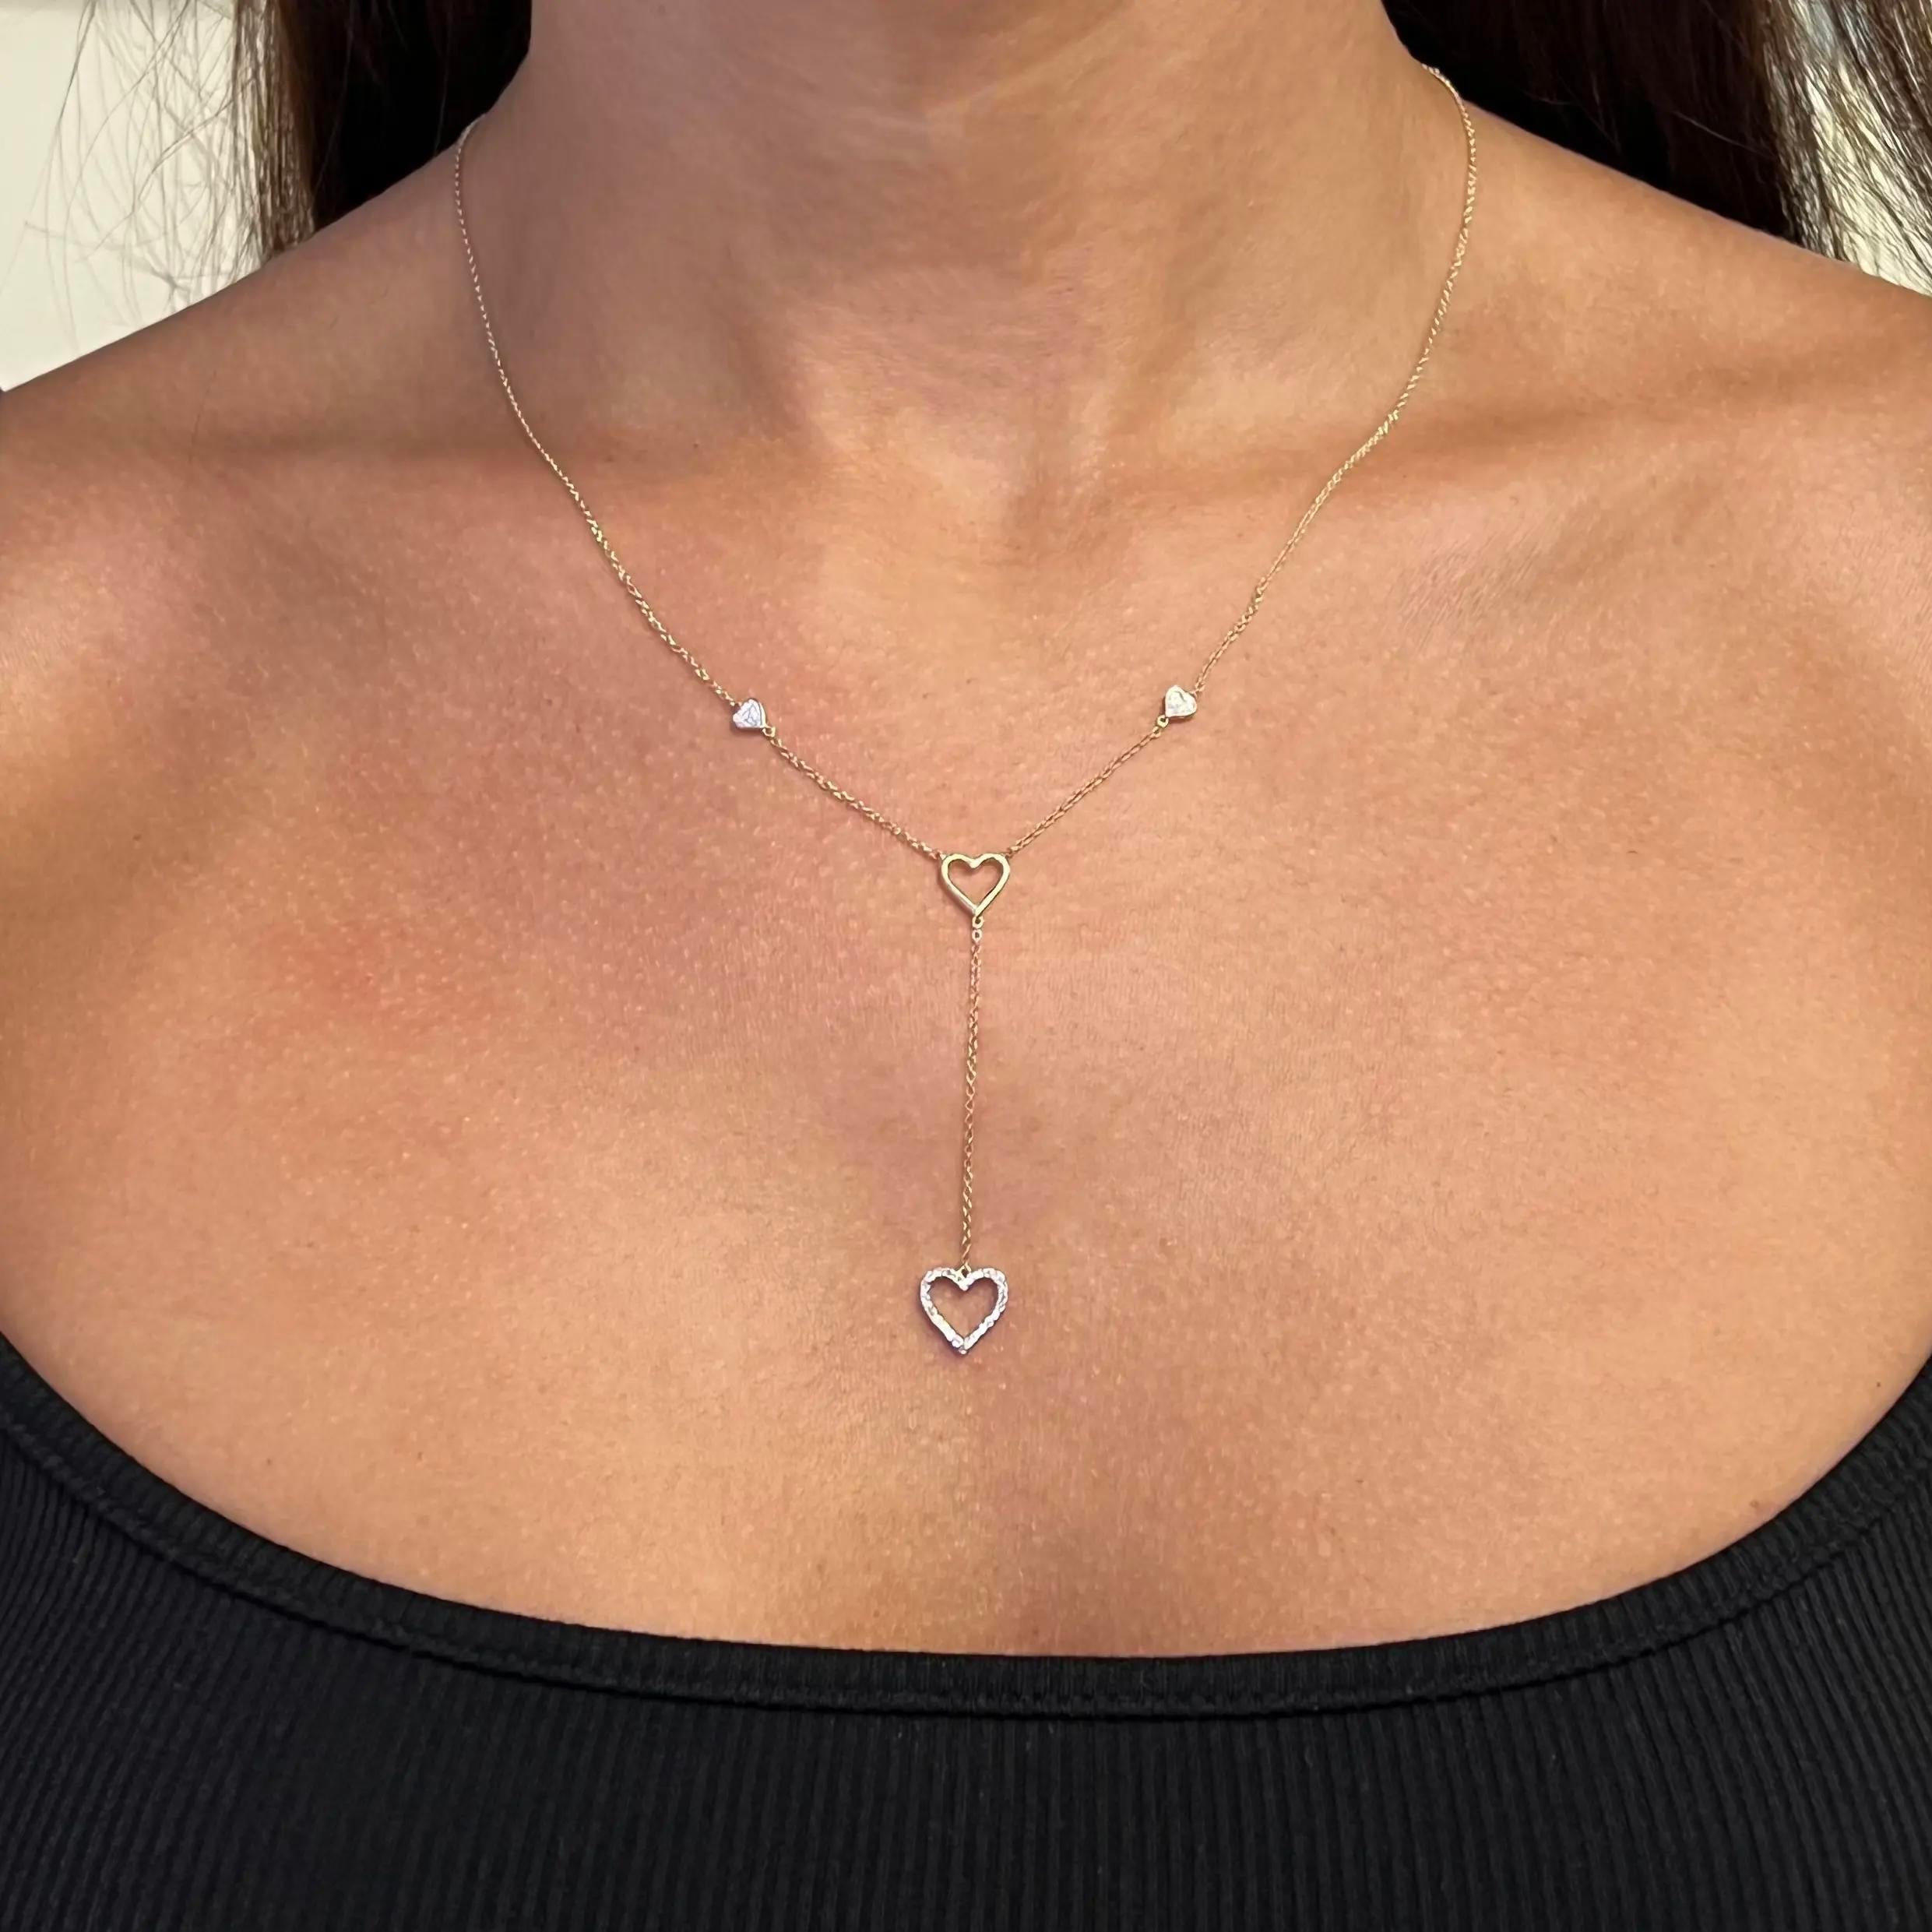 Beautiful and delicate this diamond lariat necklace will leave everyone speechless the moment they see it. Crafted in high polished 14K yellow gold. It features two pave set diamond studded heart shape motifs with a heart cut out in the center,